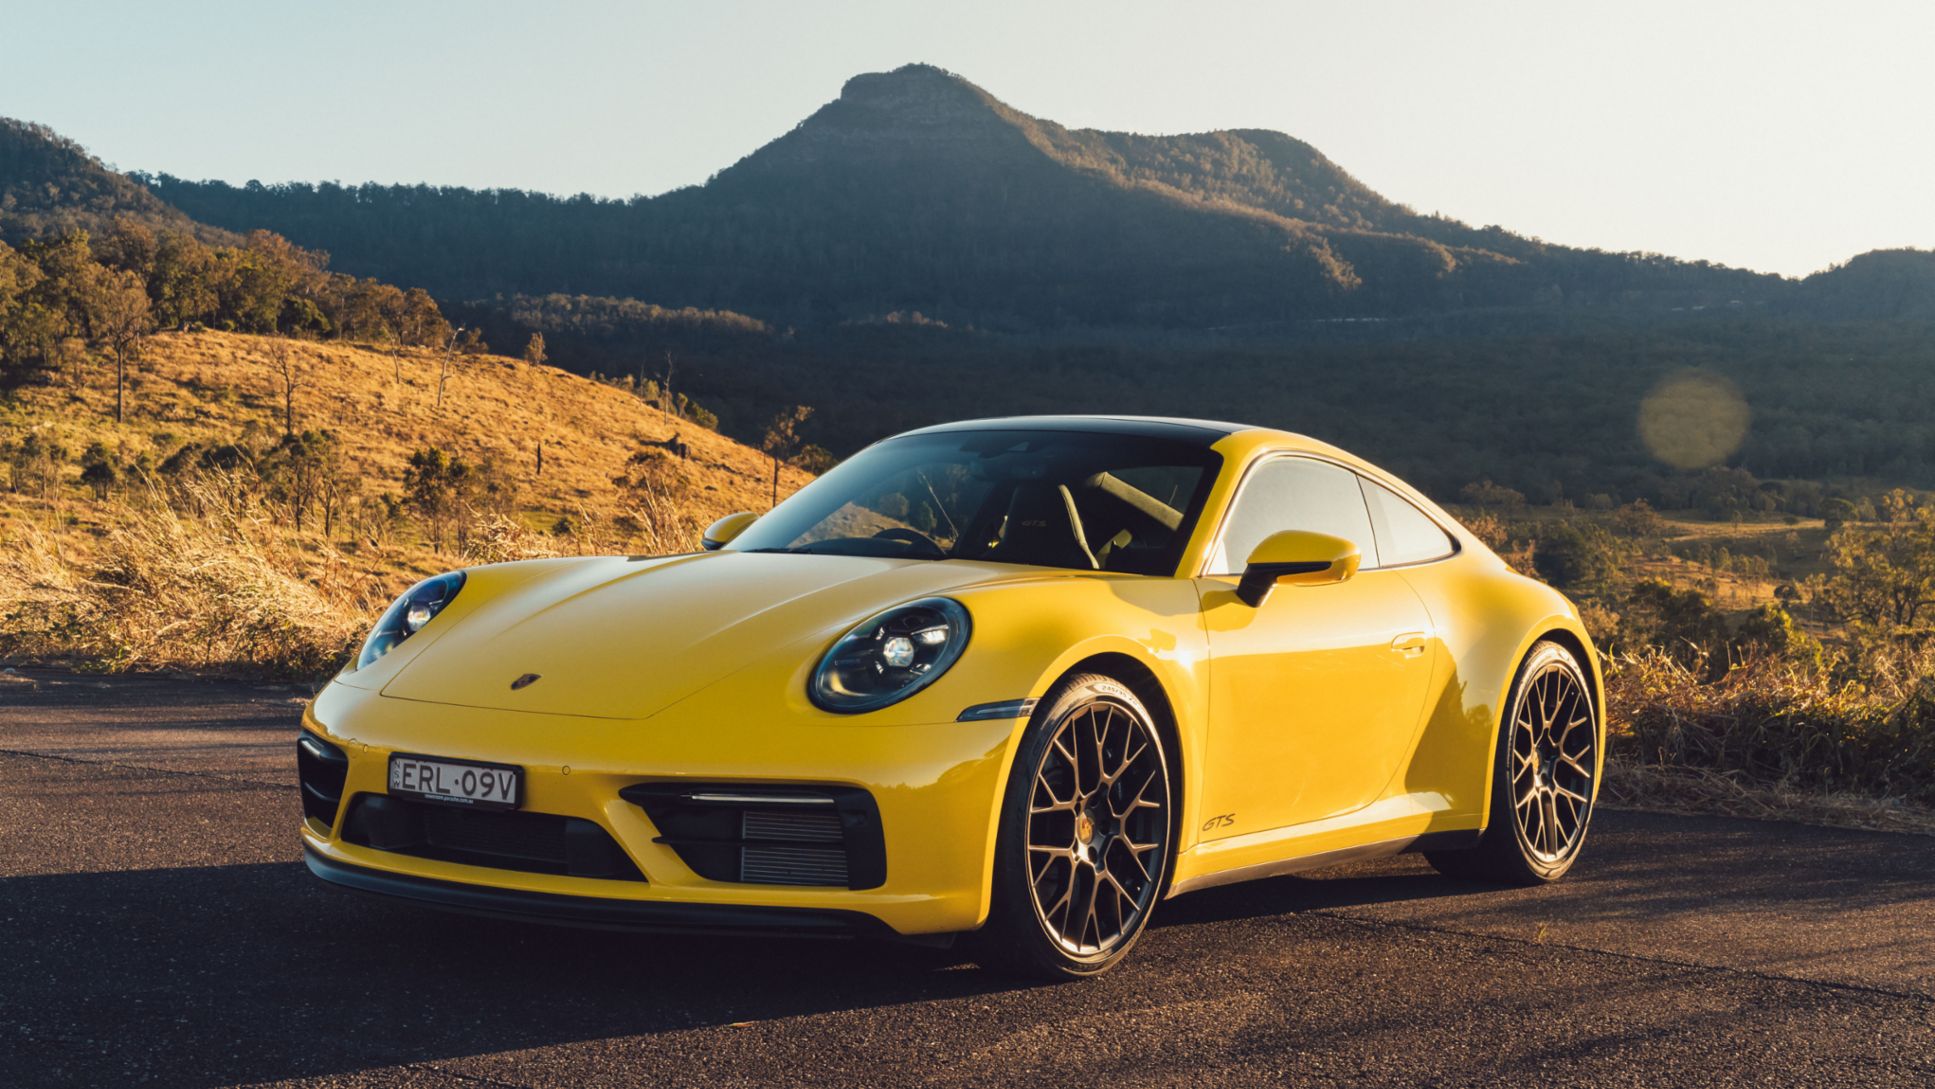 Product Highlights: The Porsche 911 GTS models